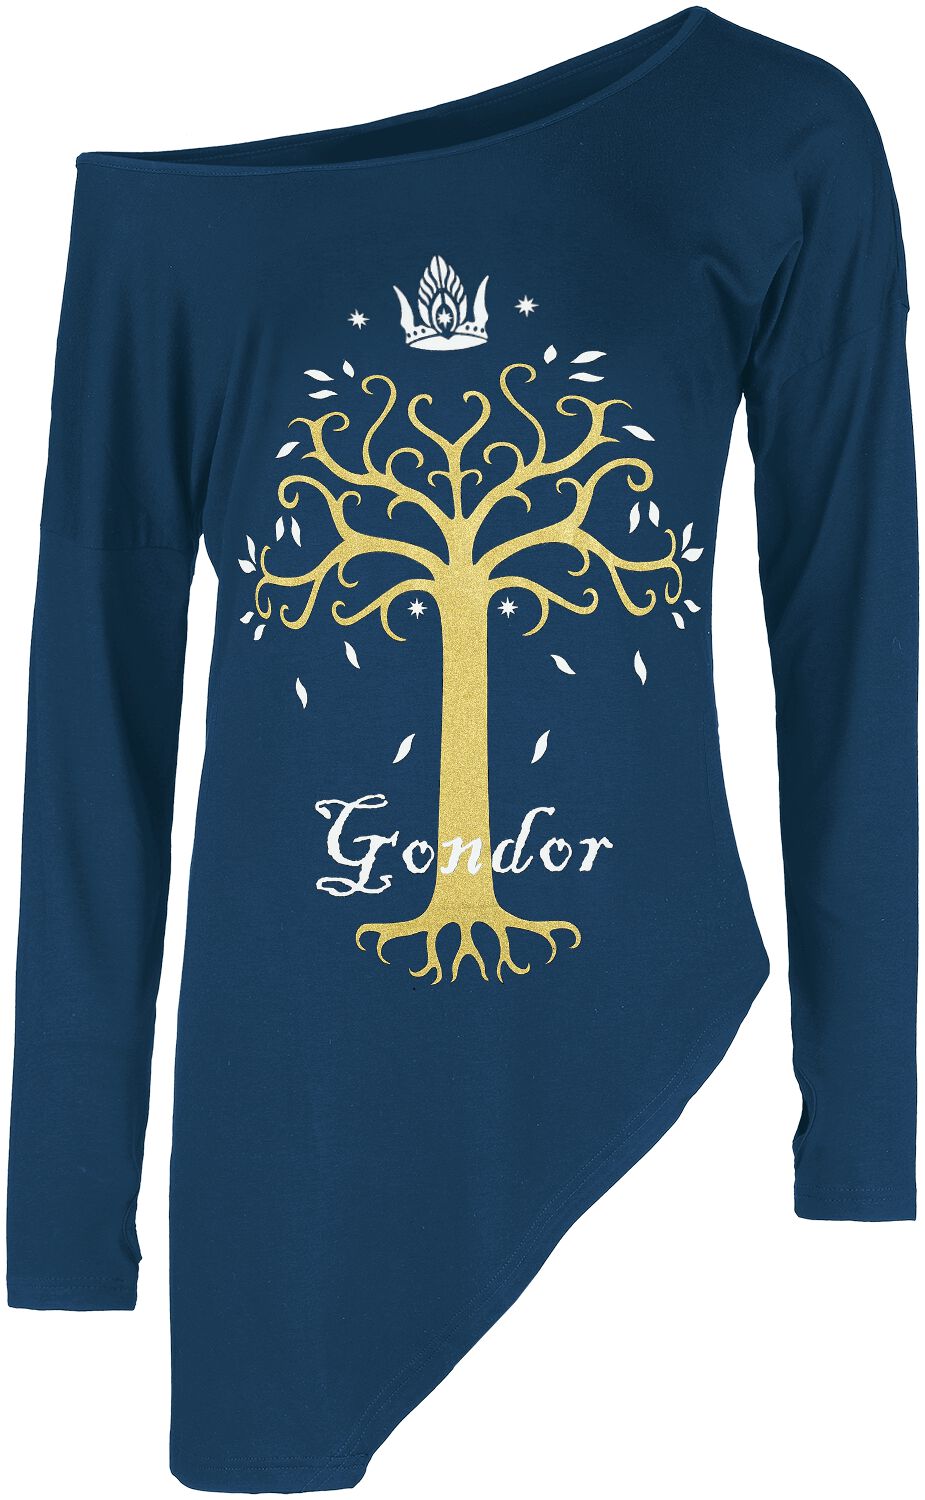 The Lord Of The Rings Gondor Long-sleeve Shirt blue